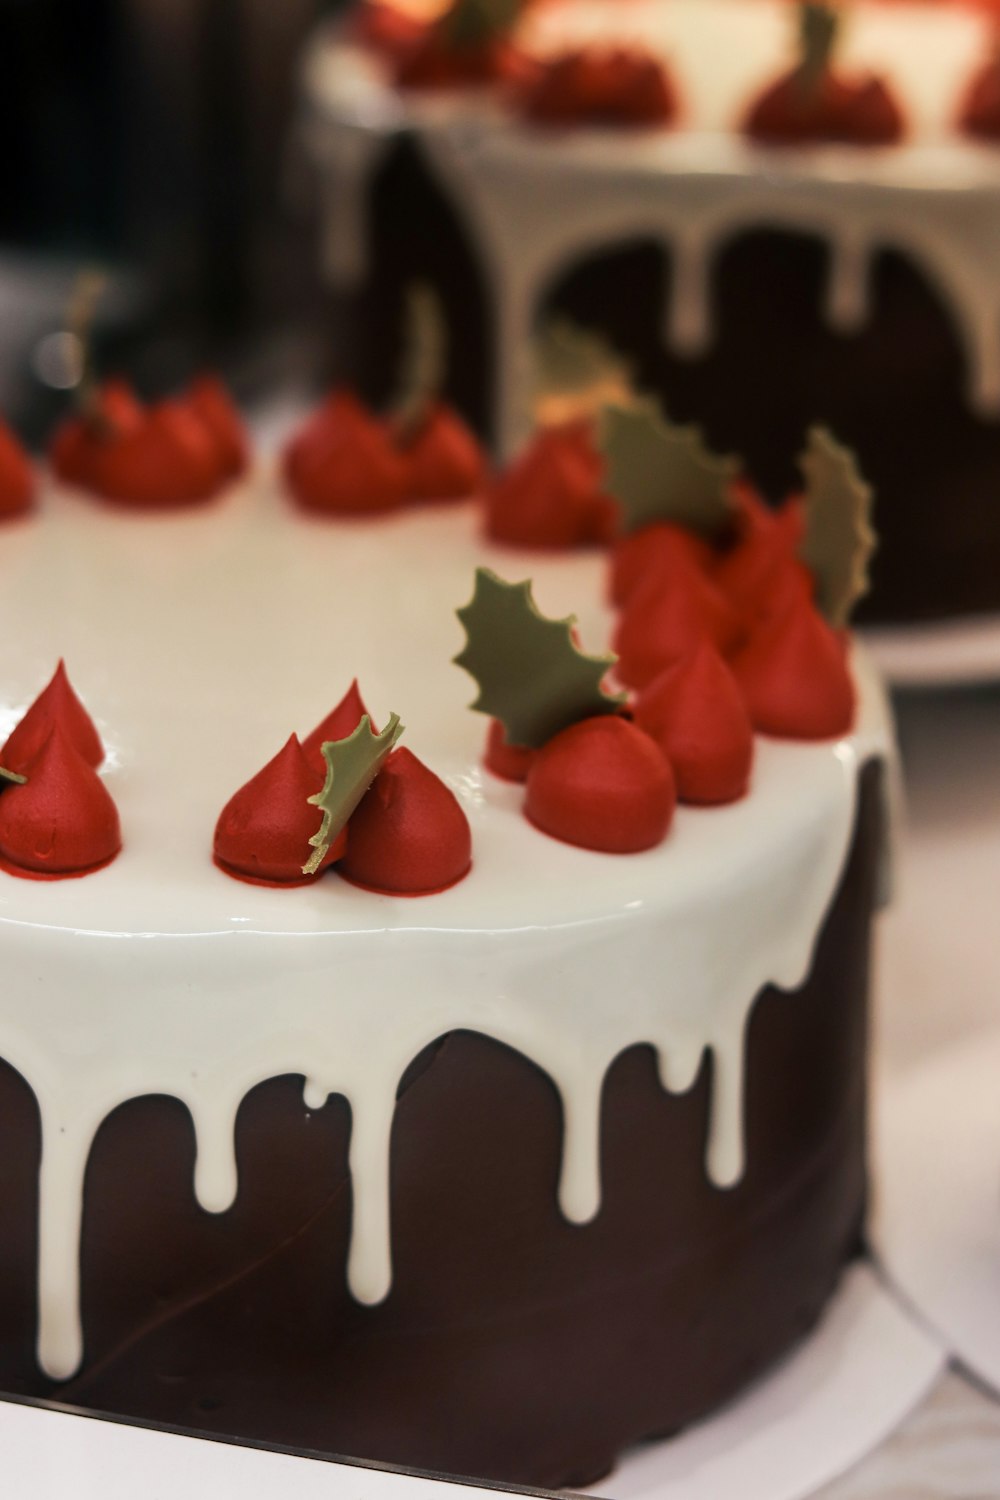 a cake with red berries on top